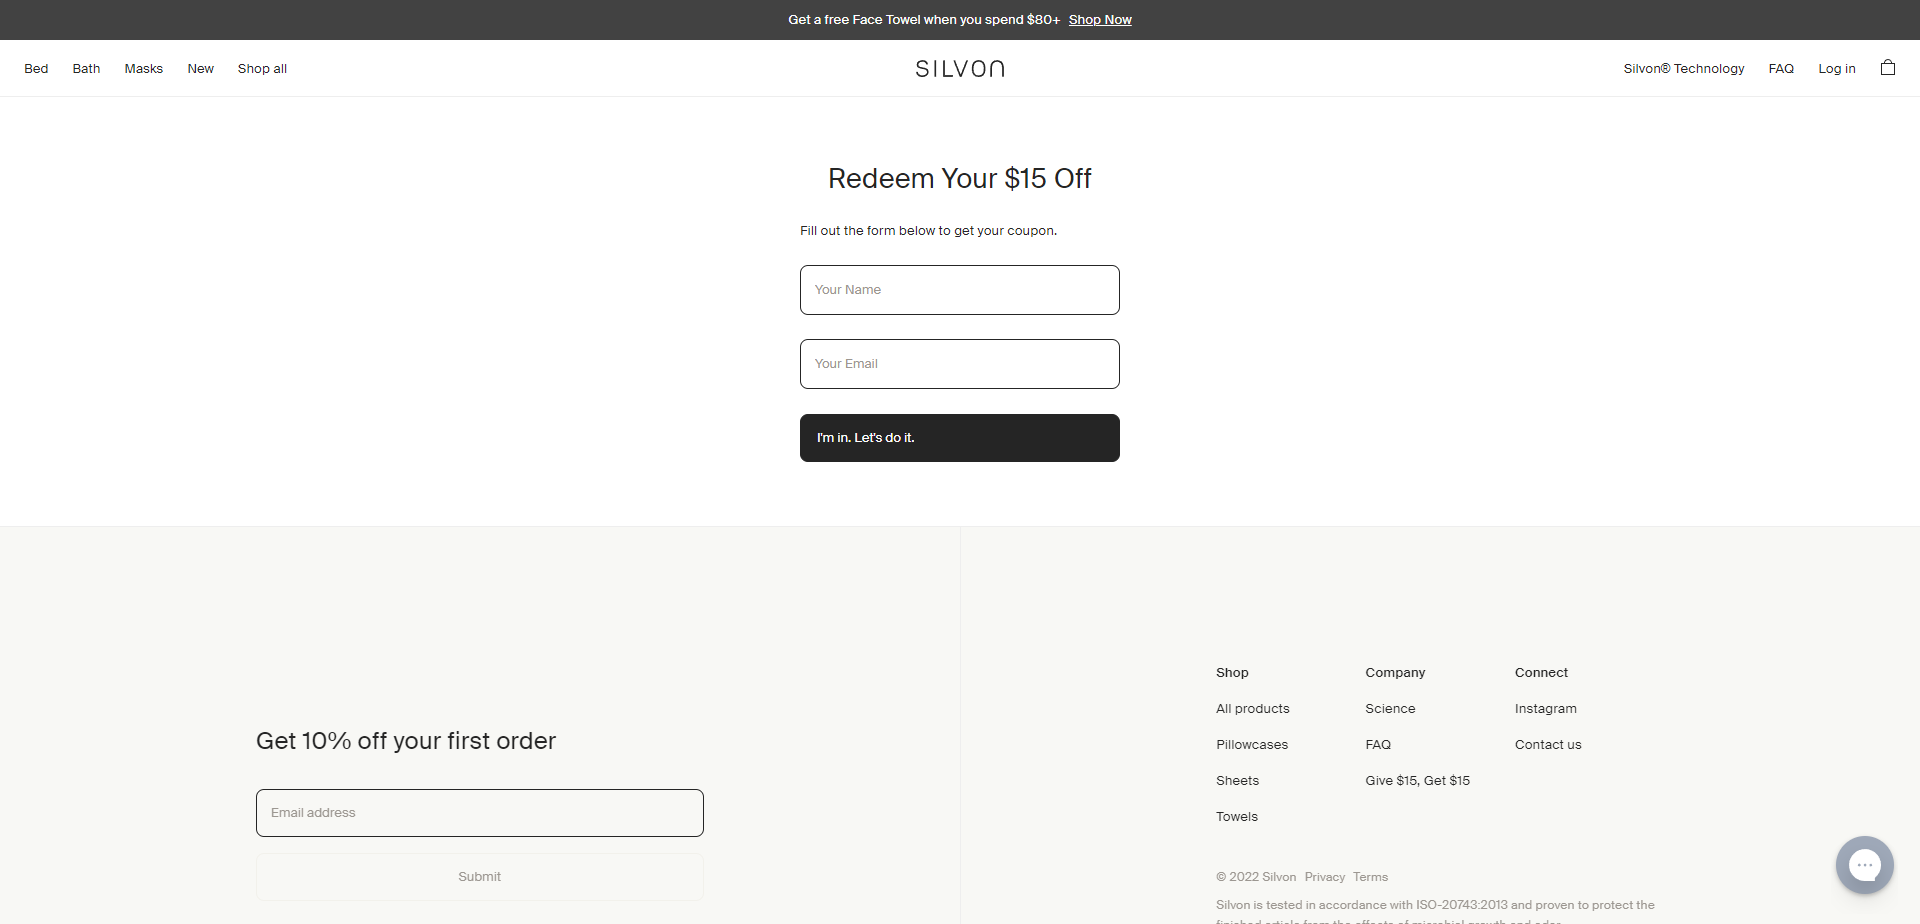 Landing Page for Silvon